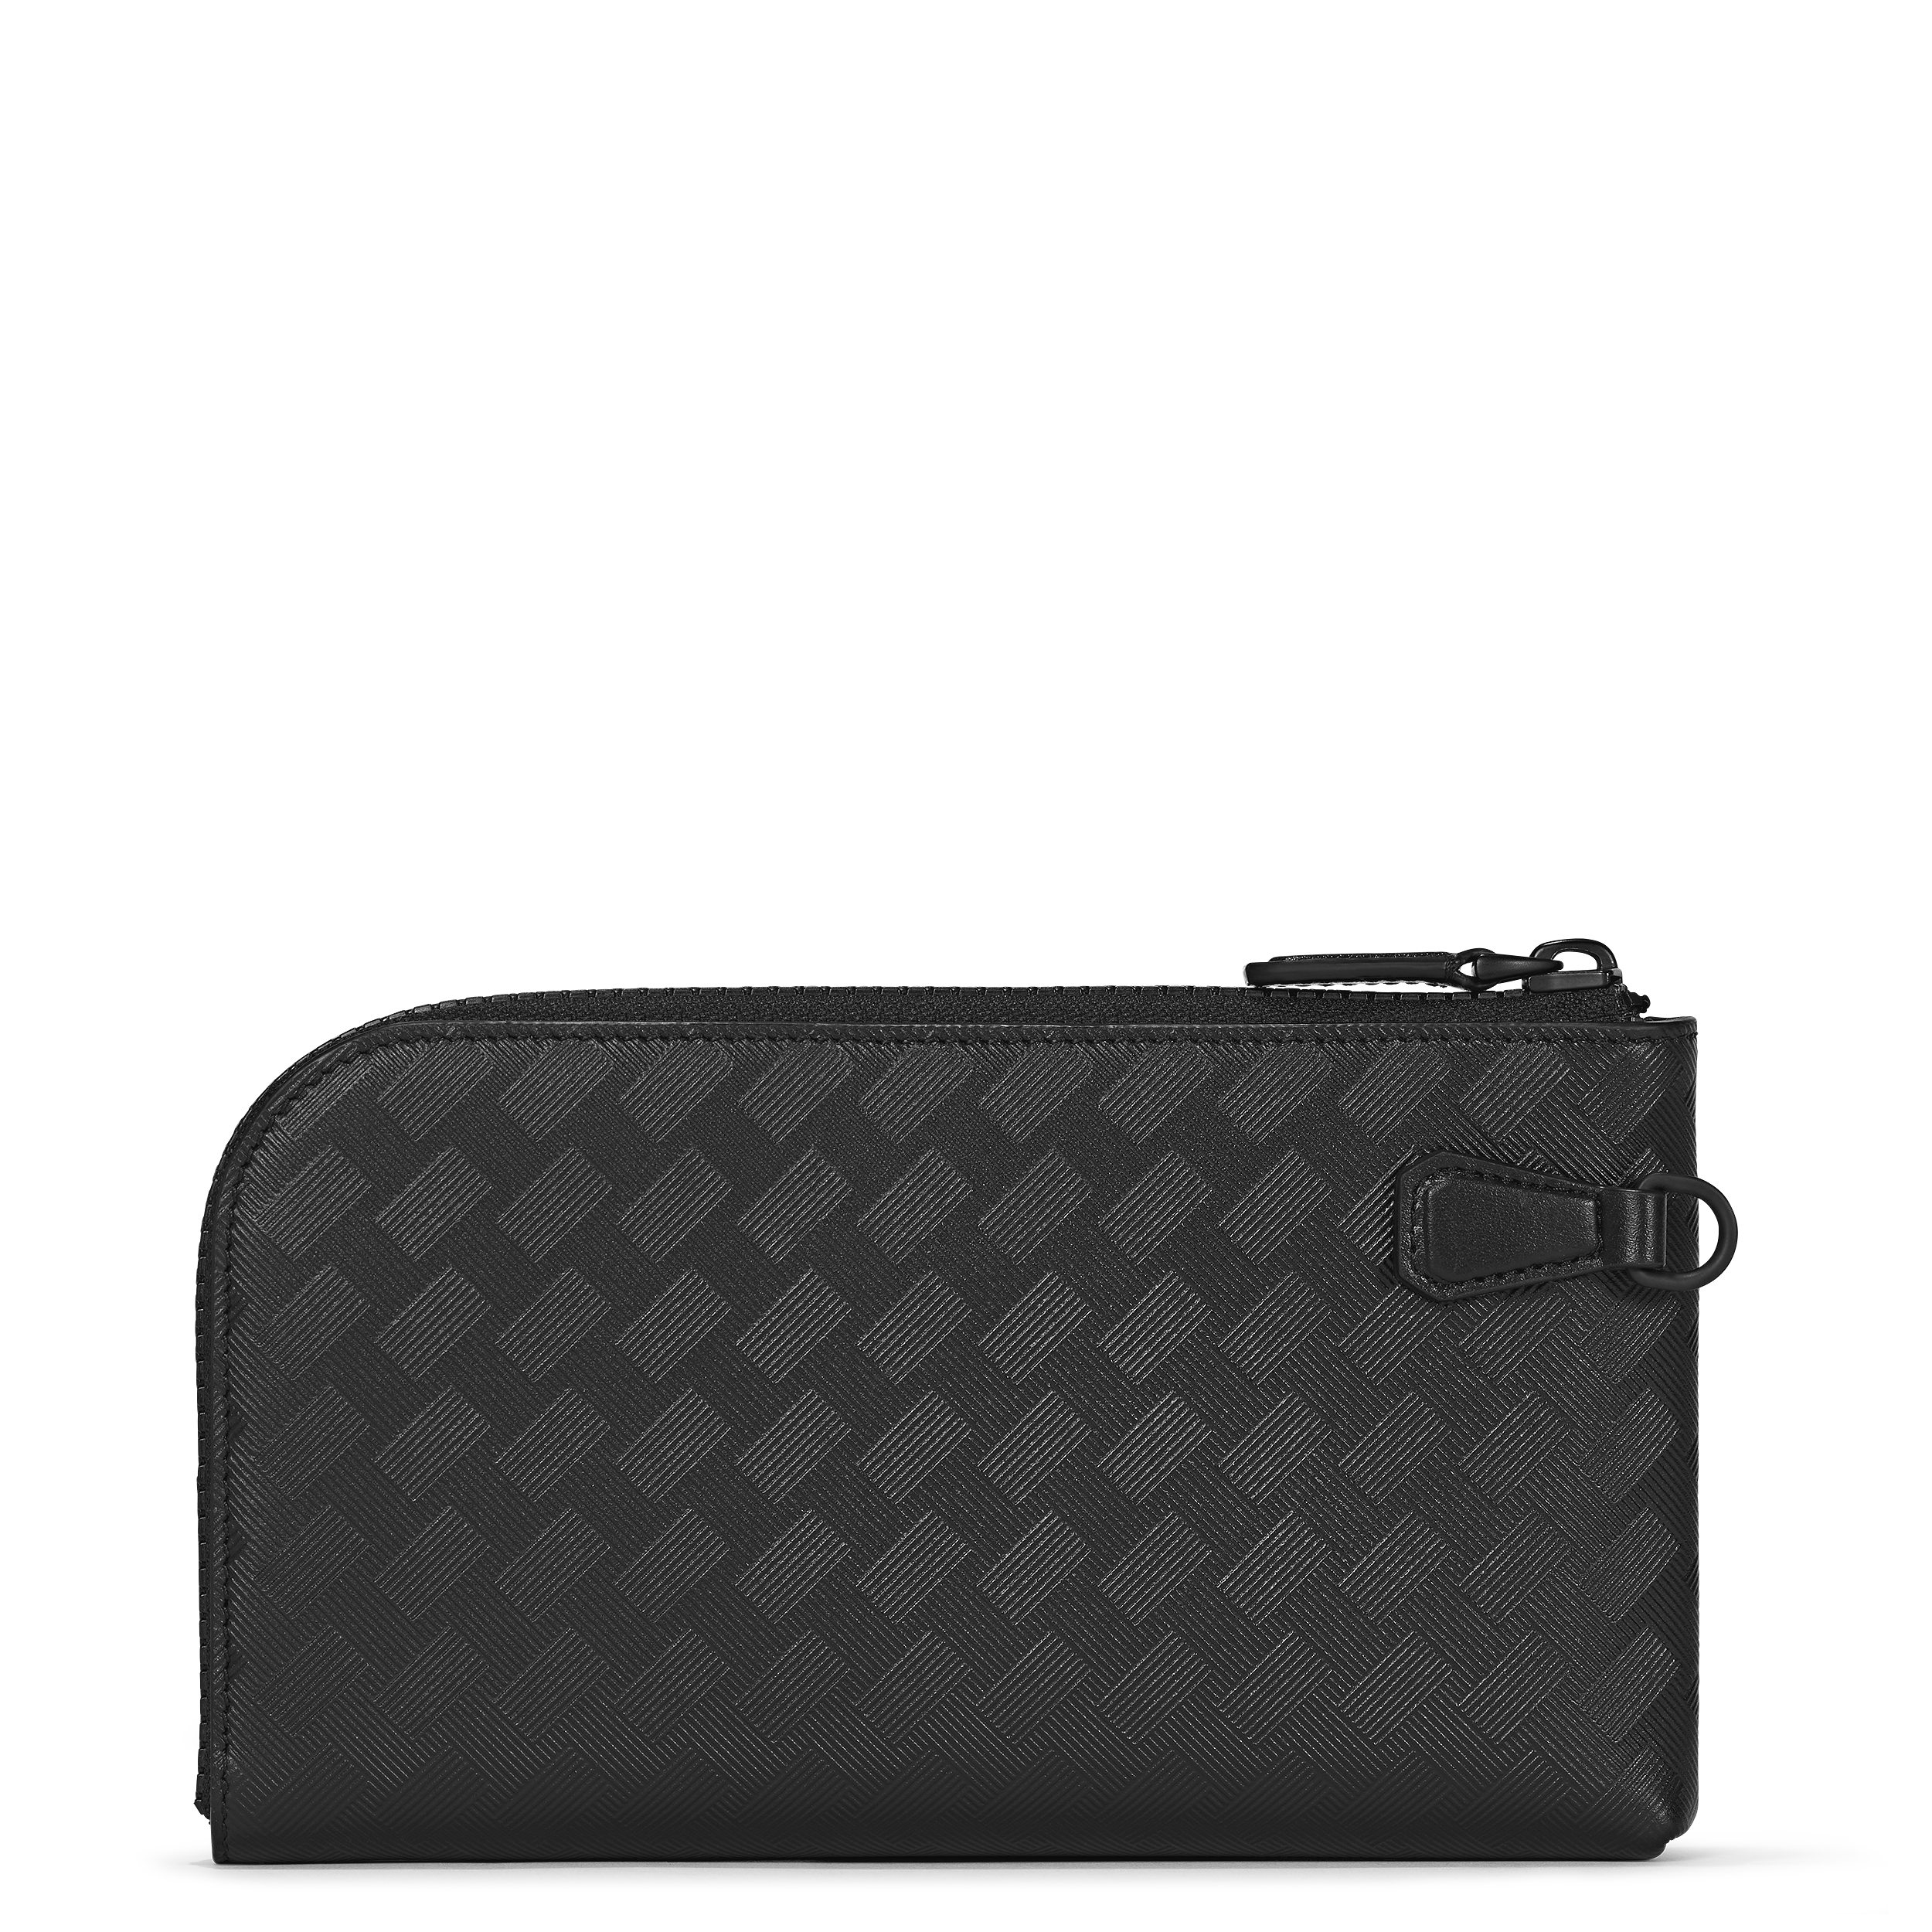 Montblanc Extreme 3.0 wallet 6cc with pocket, image 2